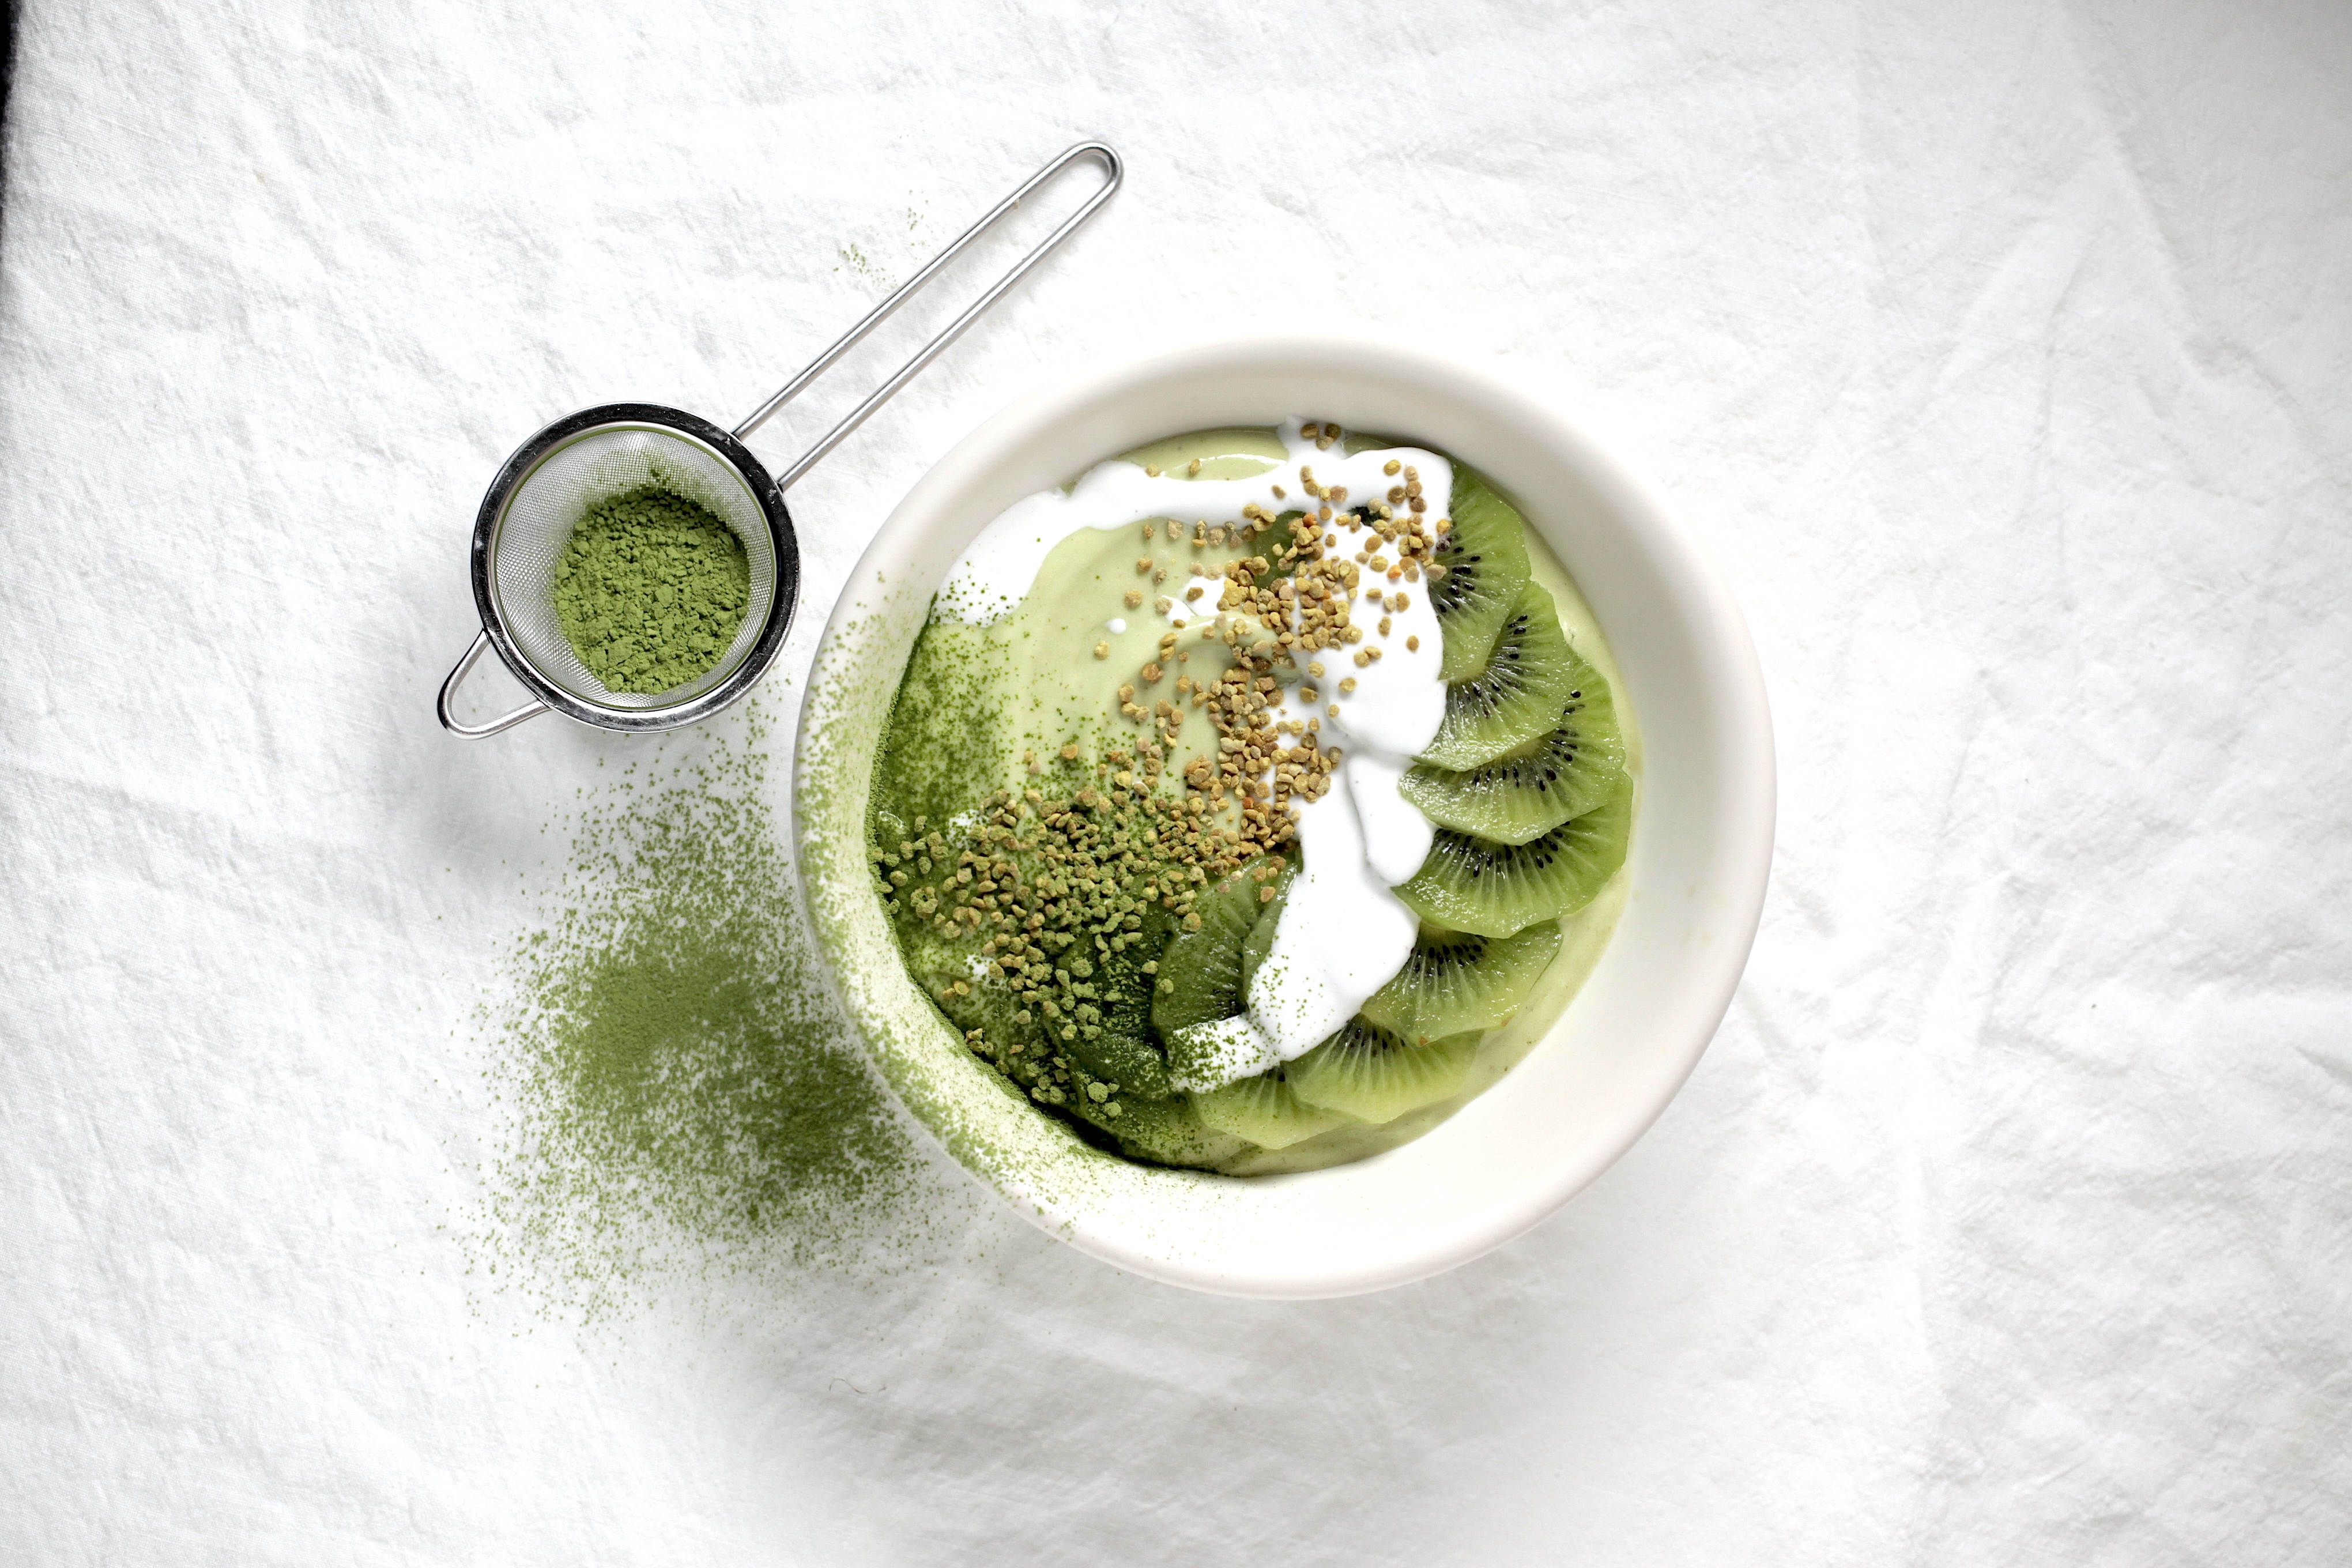 Matcha Bowl Recipe from Teresa Cutter of The Health Chef. (Paul Cutter / The Healthy Chef)